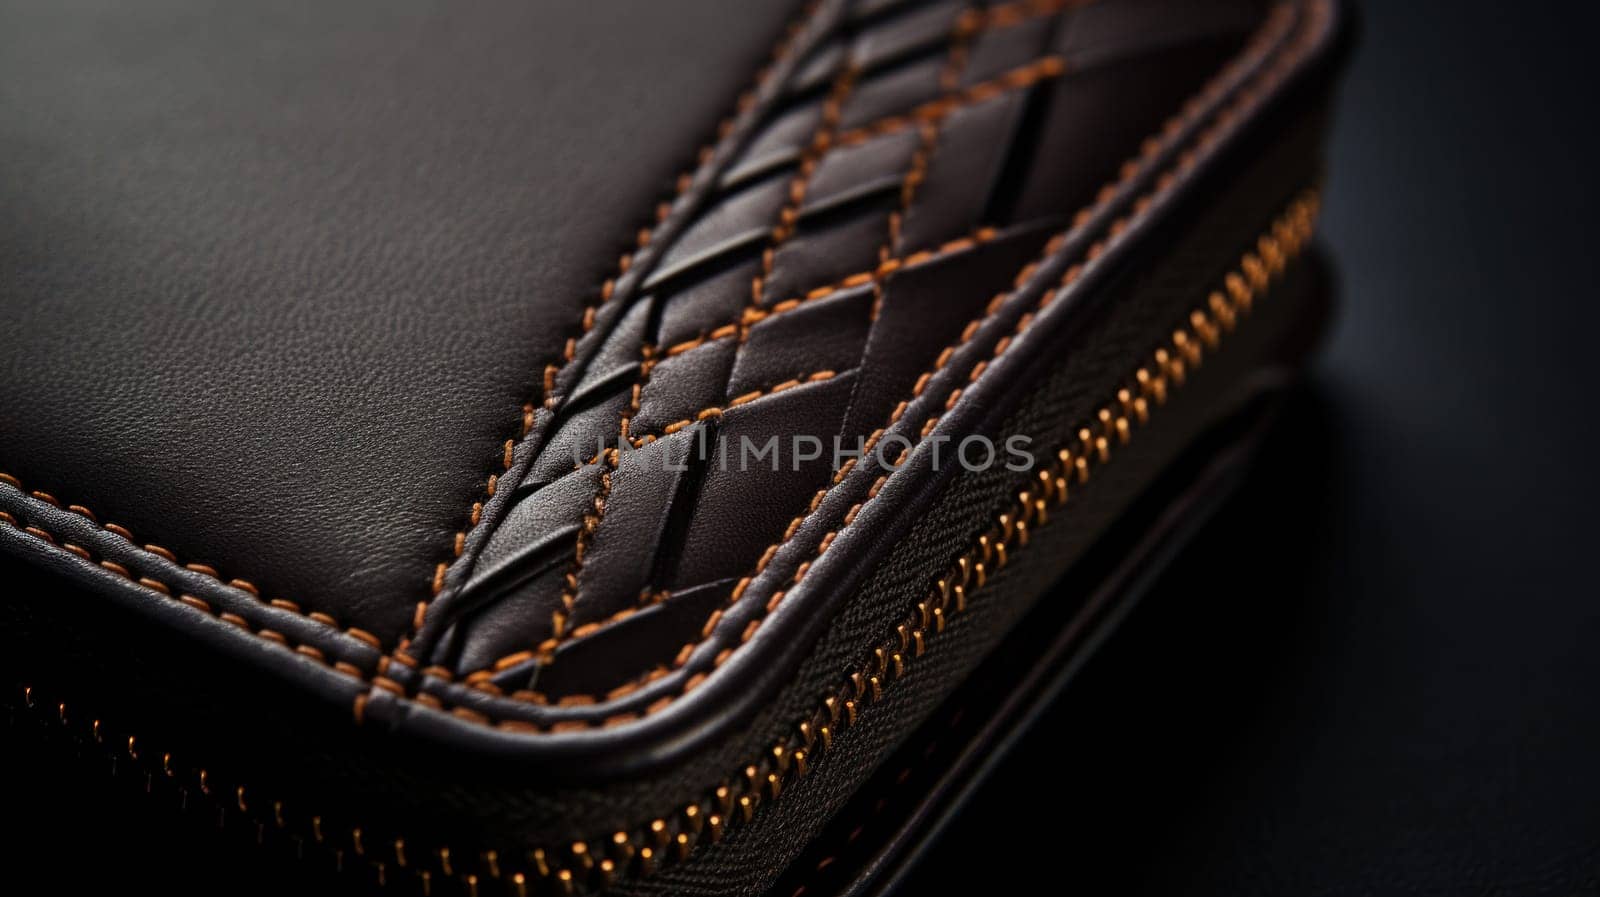 A close up of a brown leather case with stitching on it